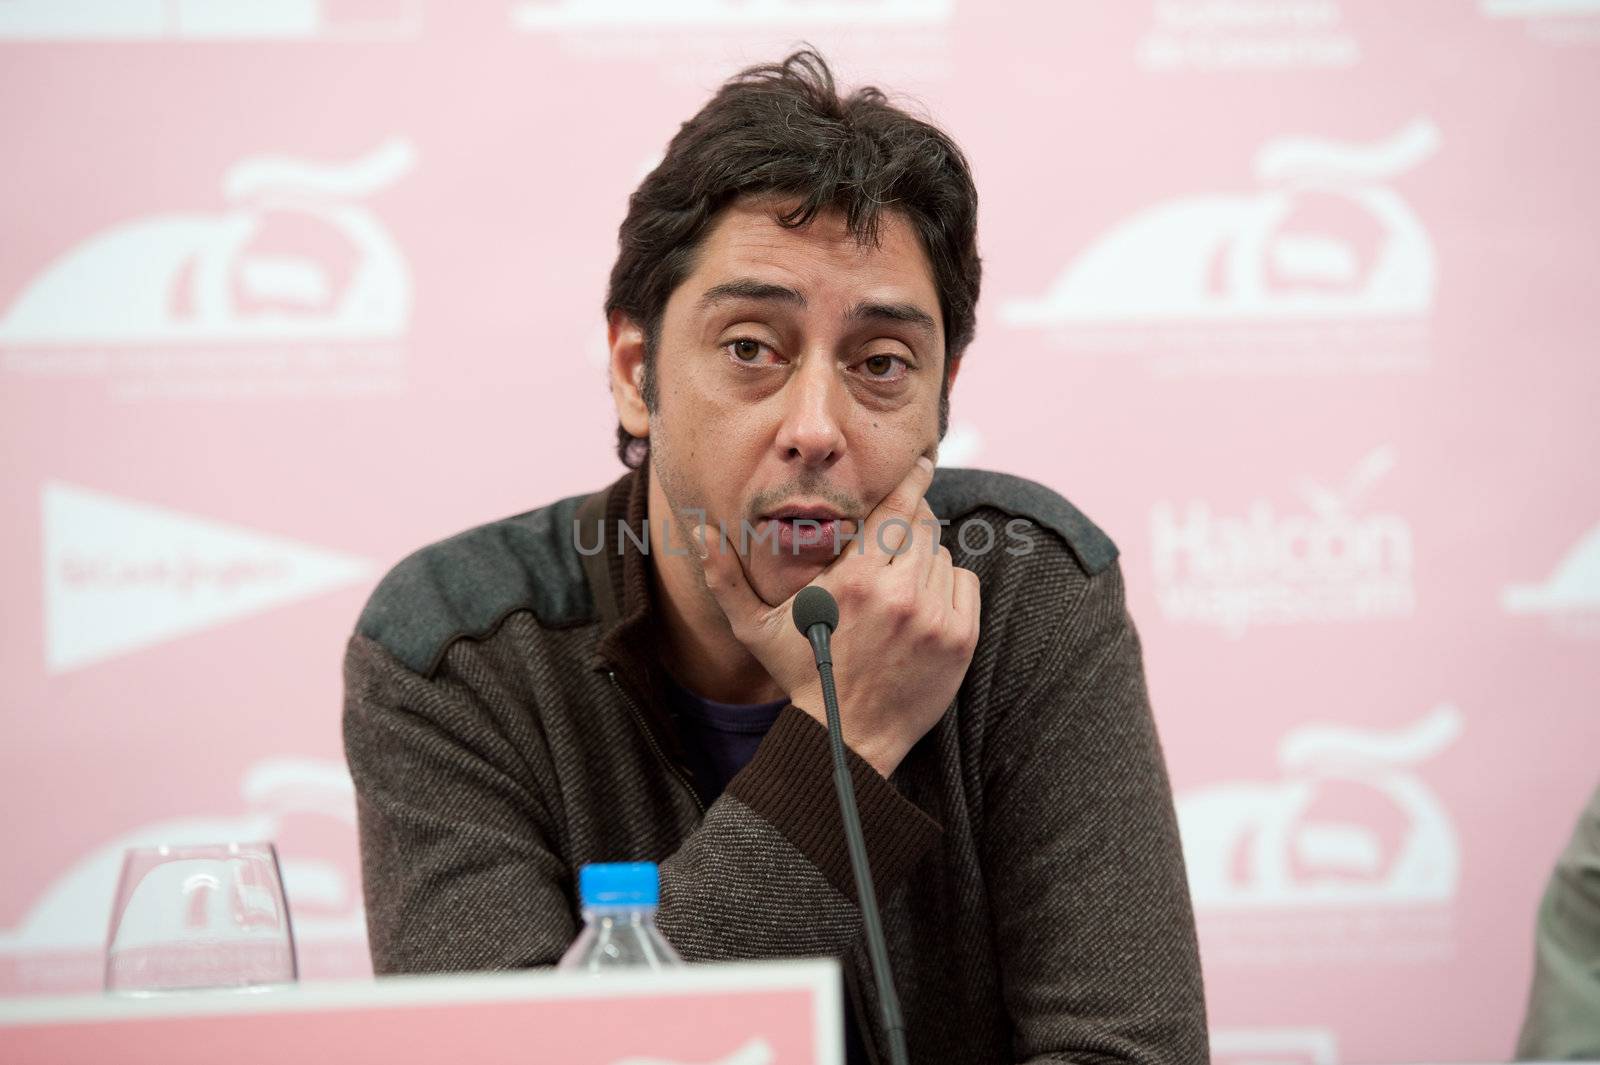 LAS PALMAS, SPAIN–MARCH 19: Miguel Gomes, from Portugal, film director of Tabu (2012), during LPA International Film Festival on March 19, 2012 in Las Palmas, Spain
